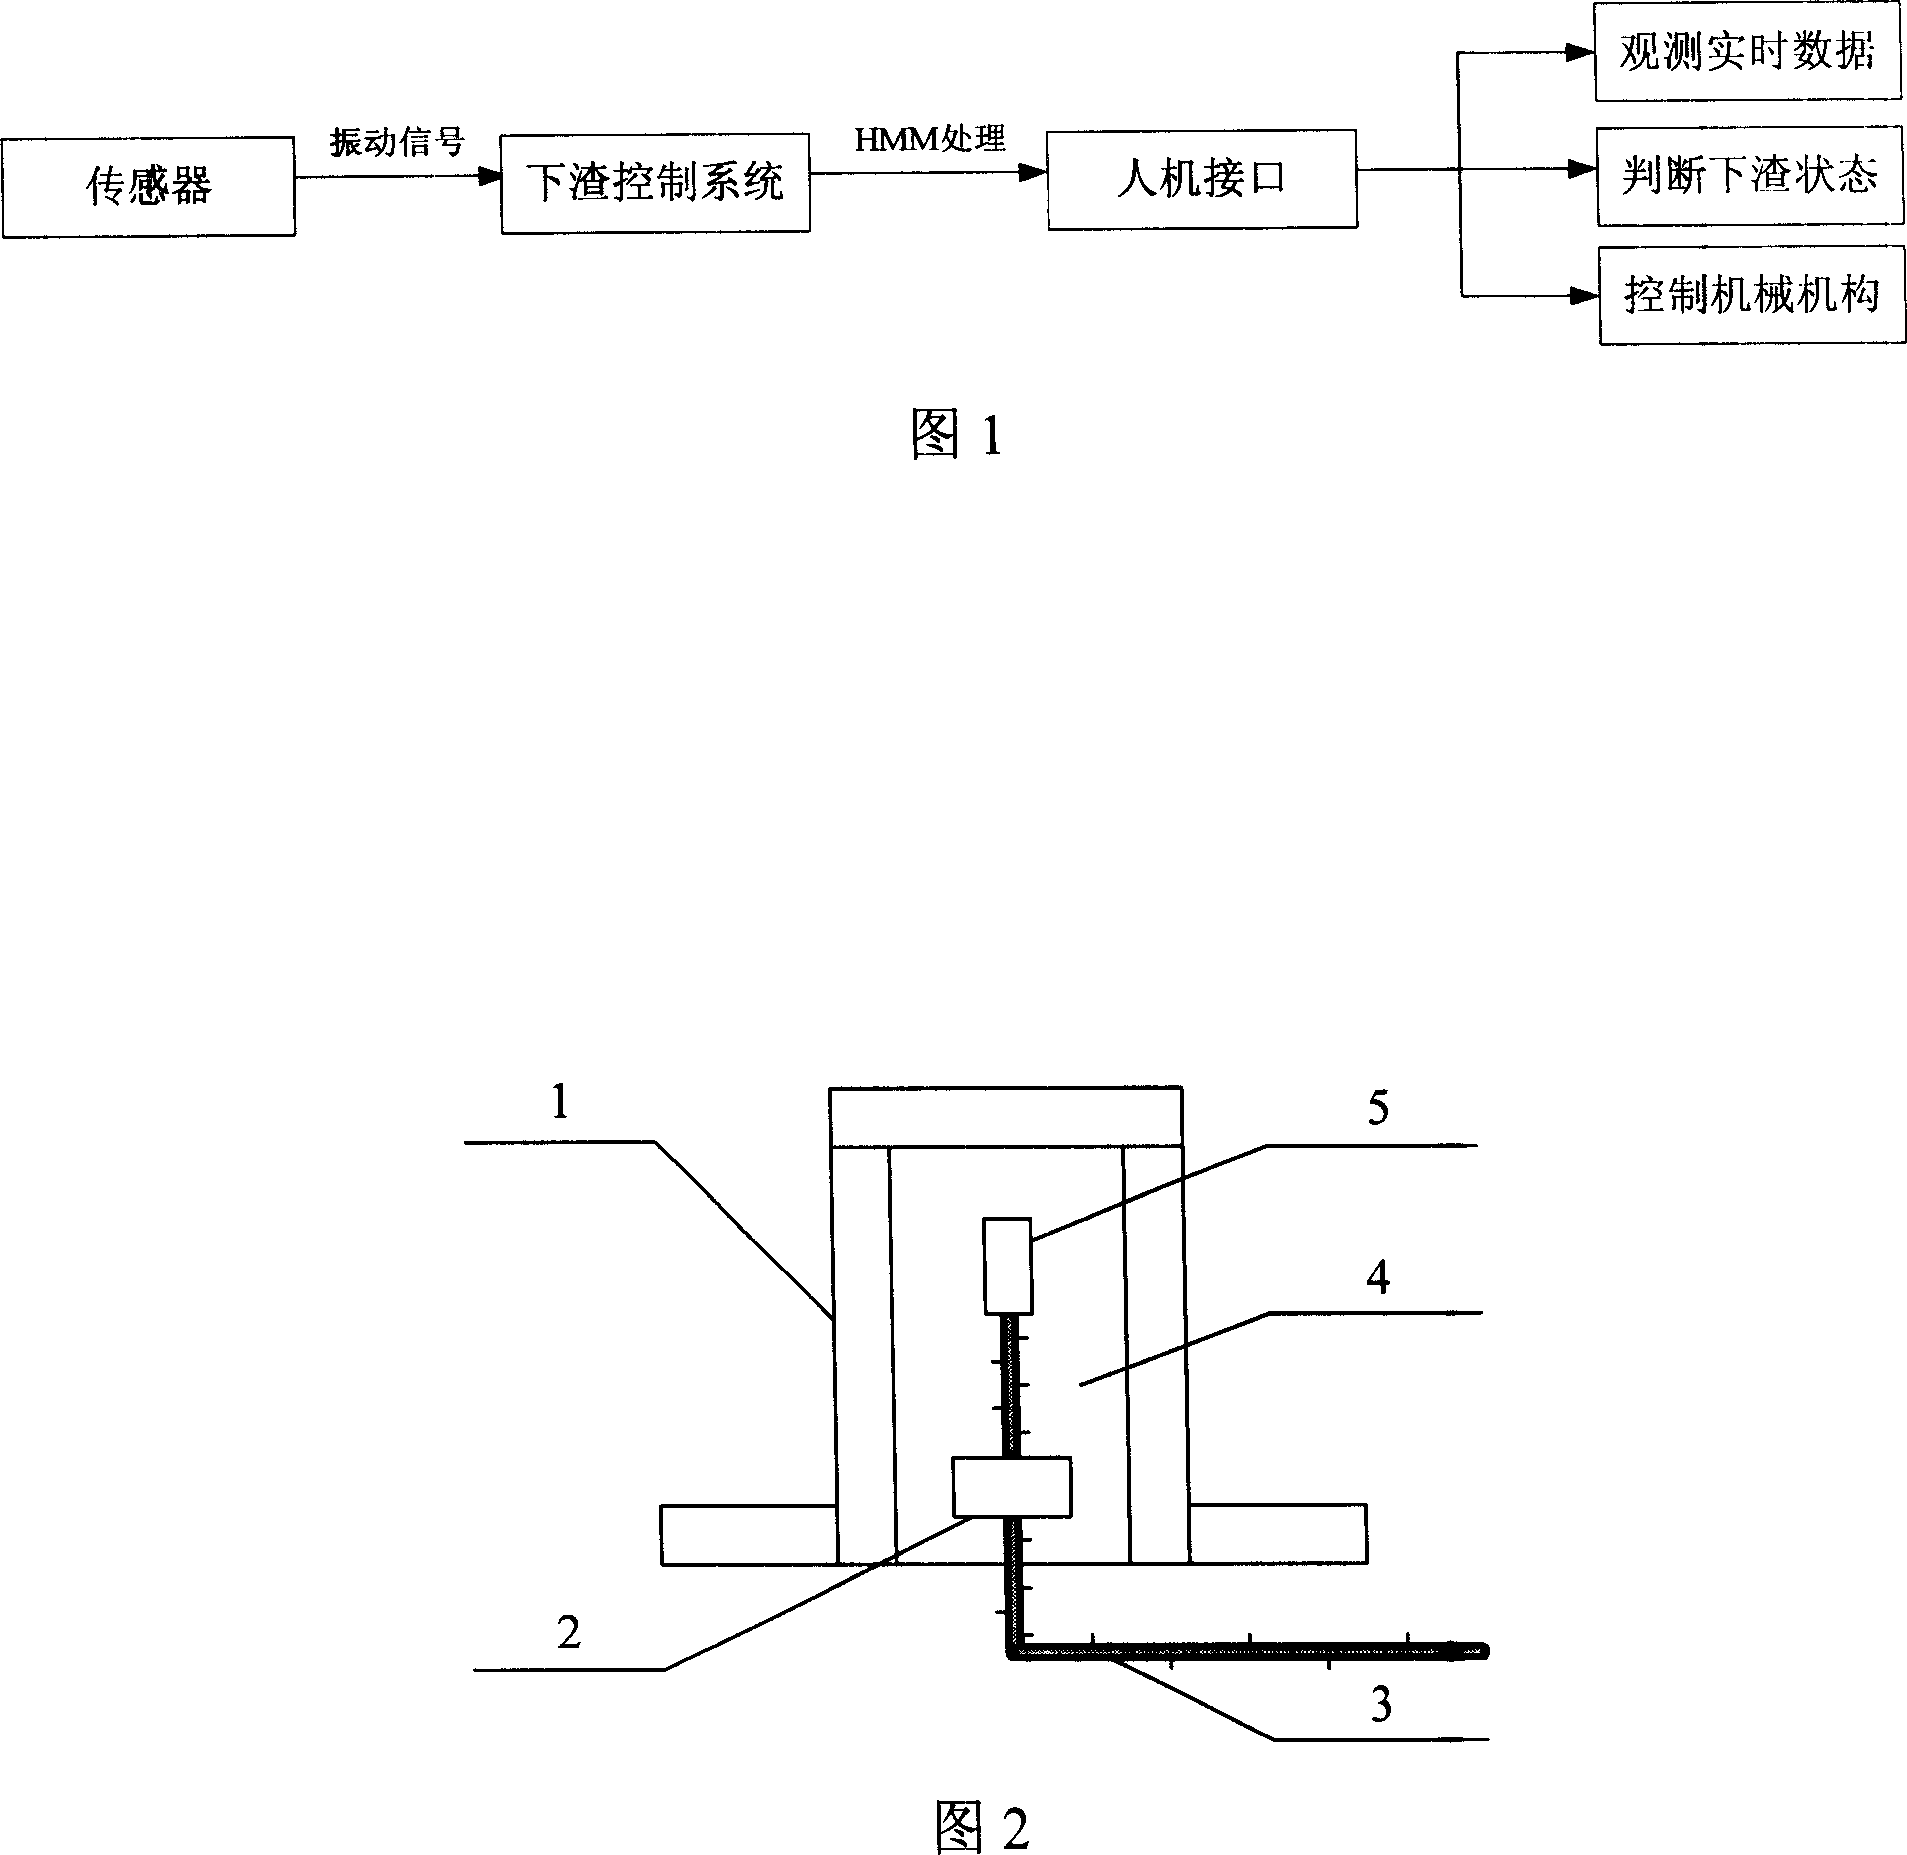 Automatic controlling method and system of detecting discharge slag from ladle